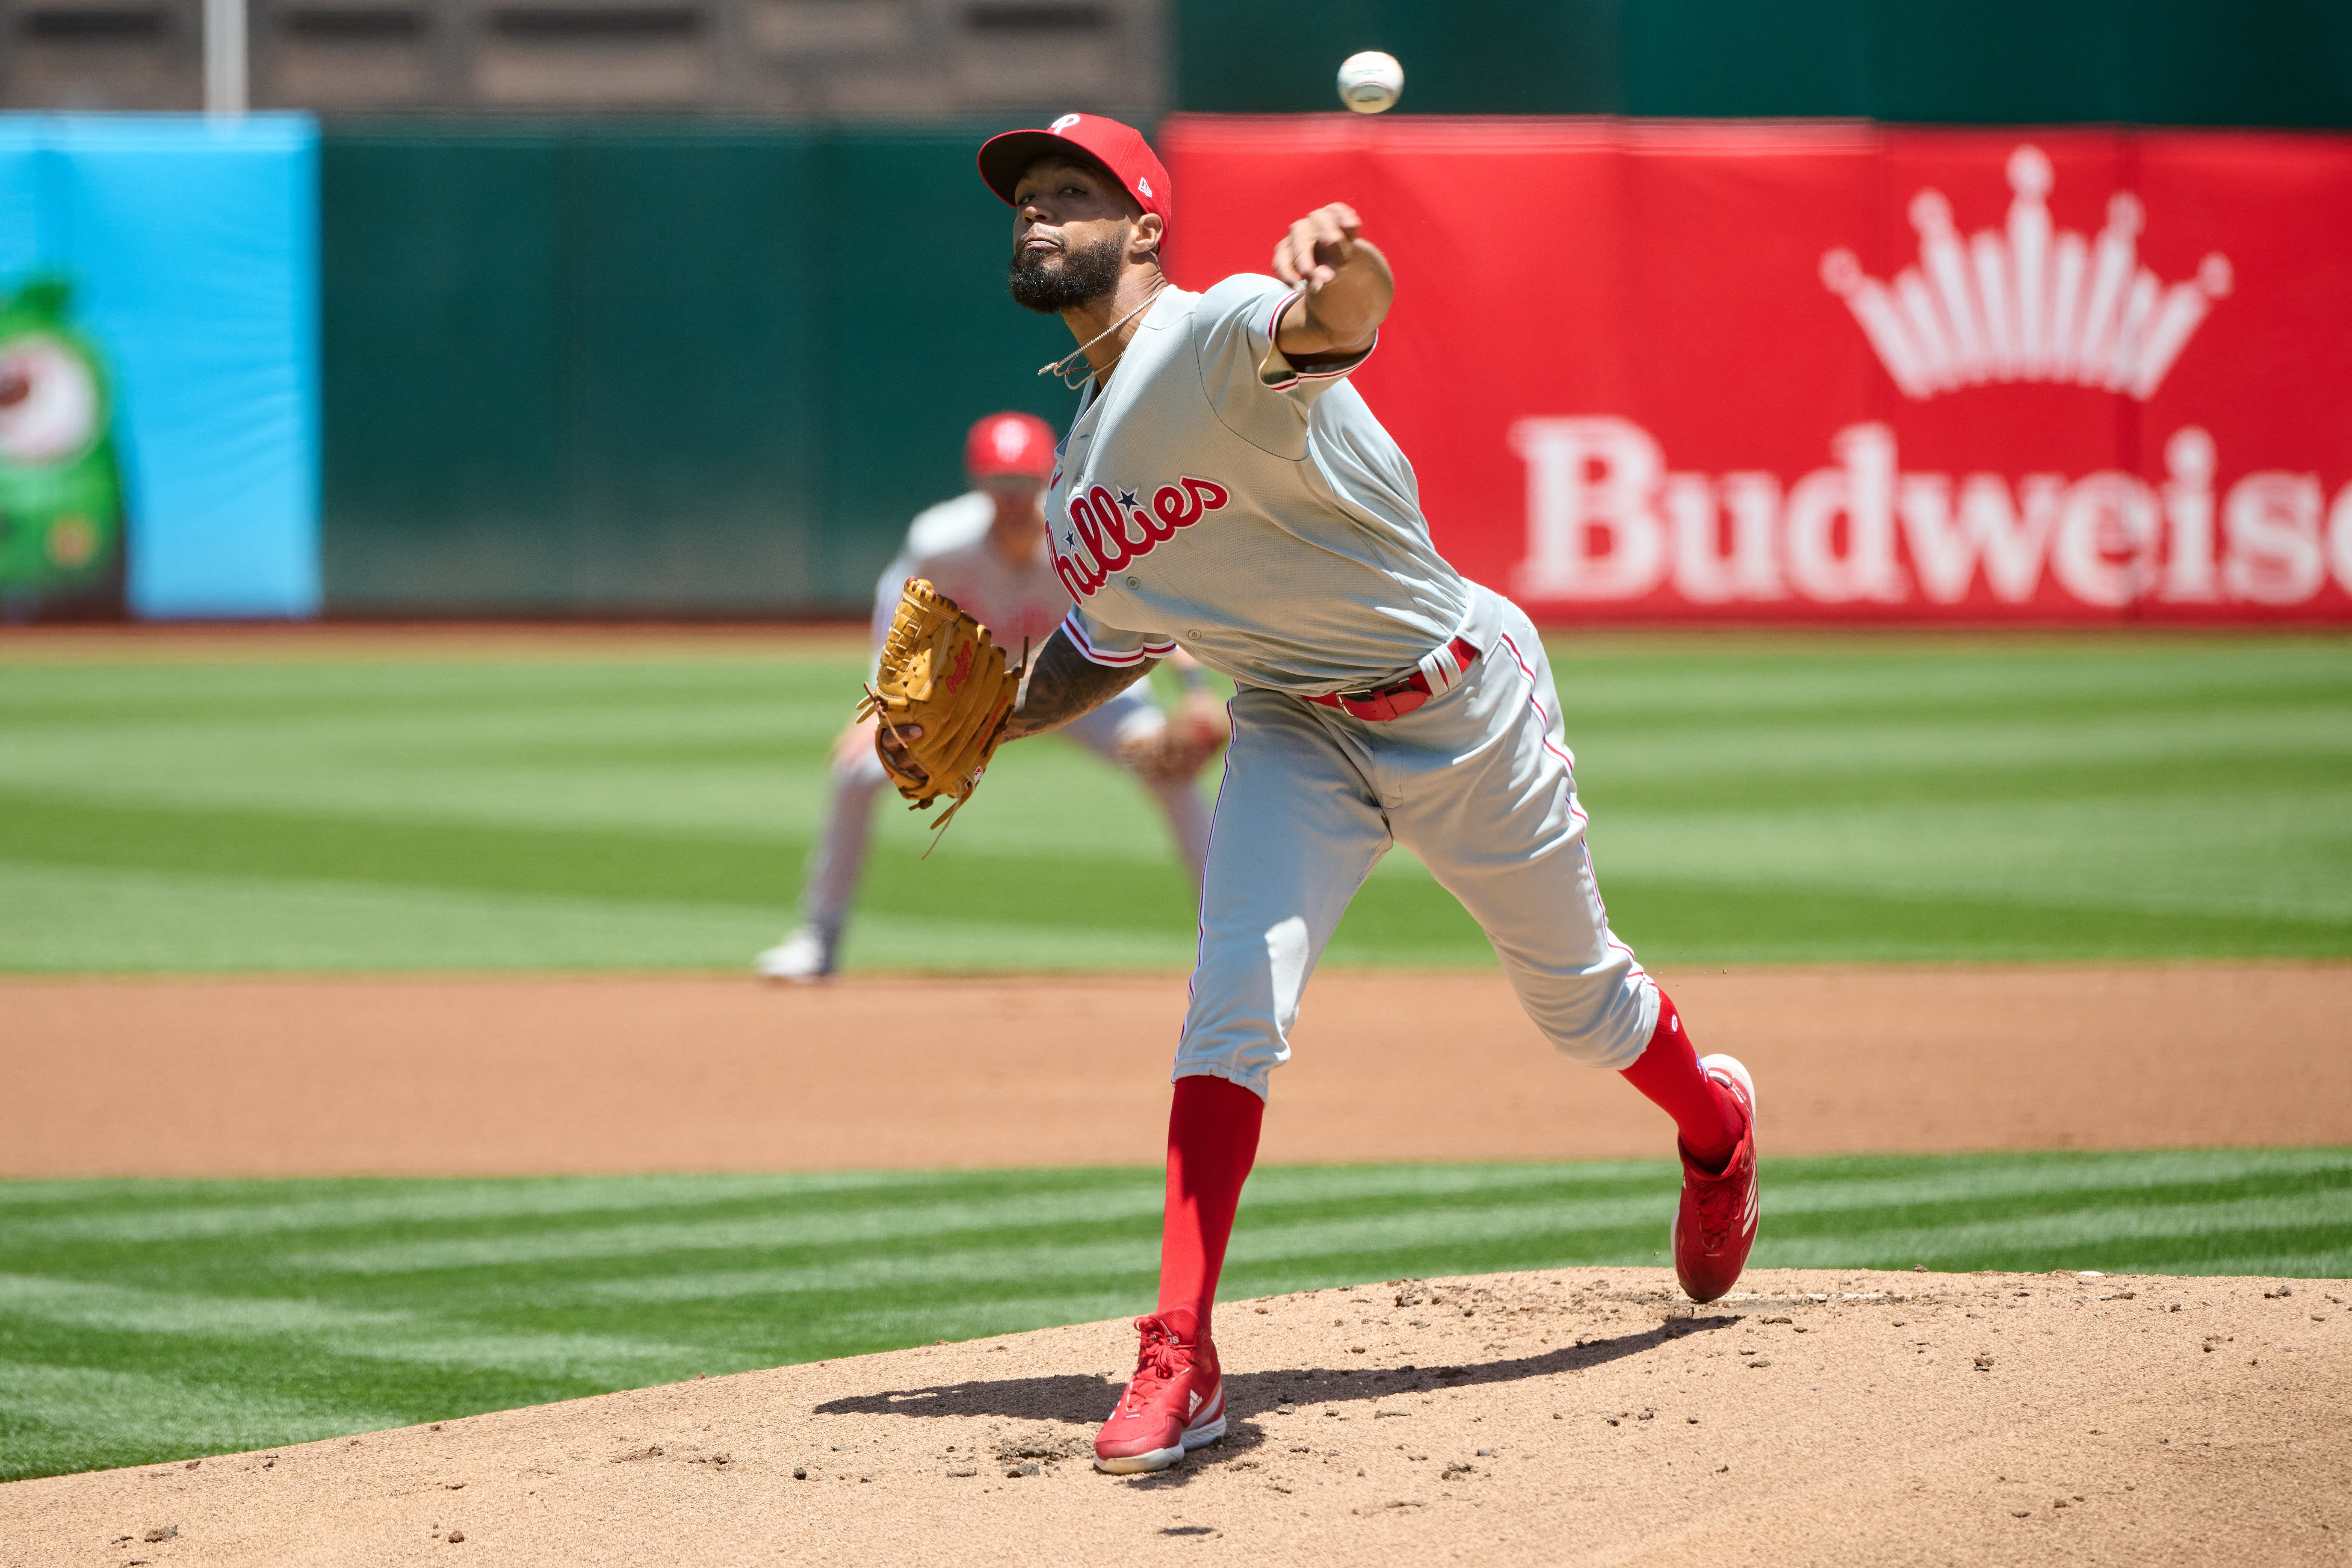 Photos from the Phillies win over the Athletics